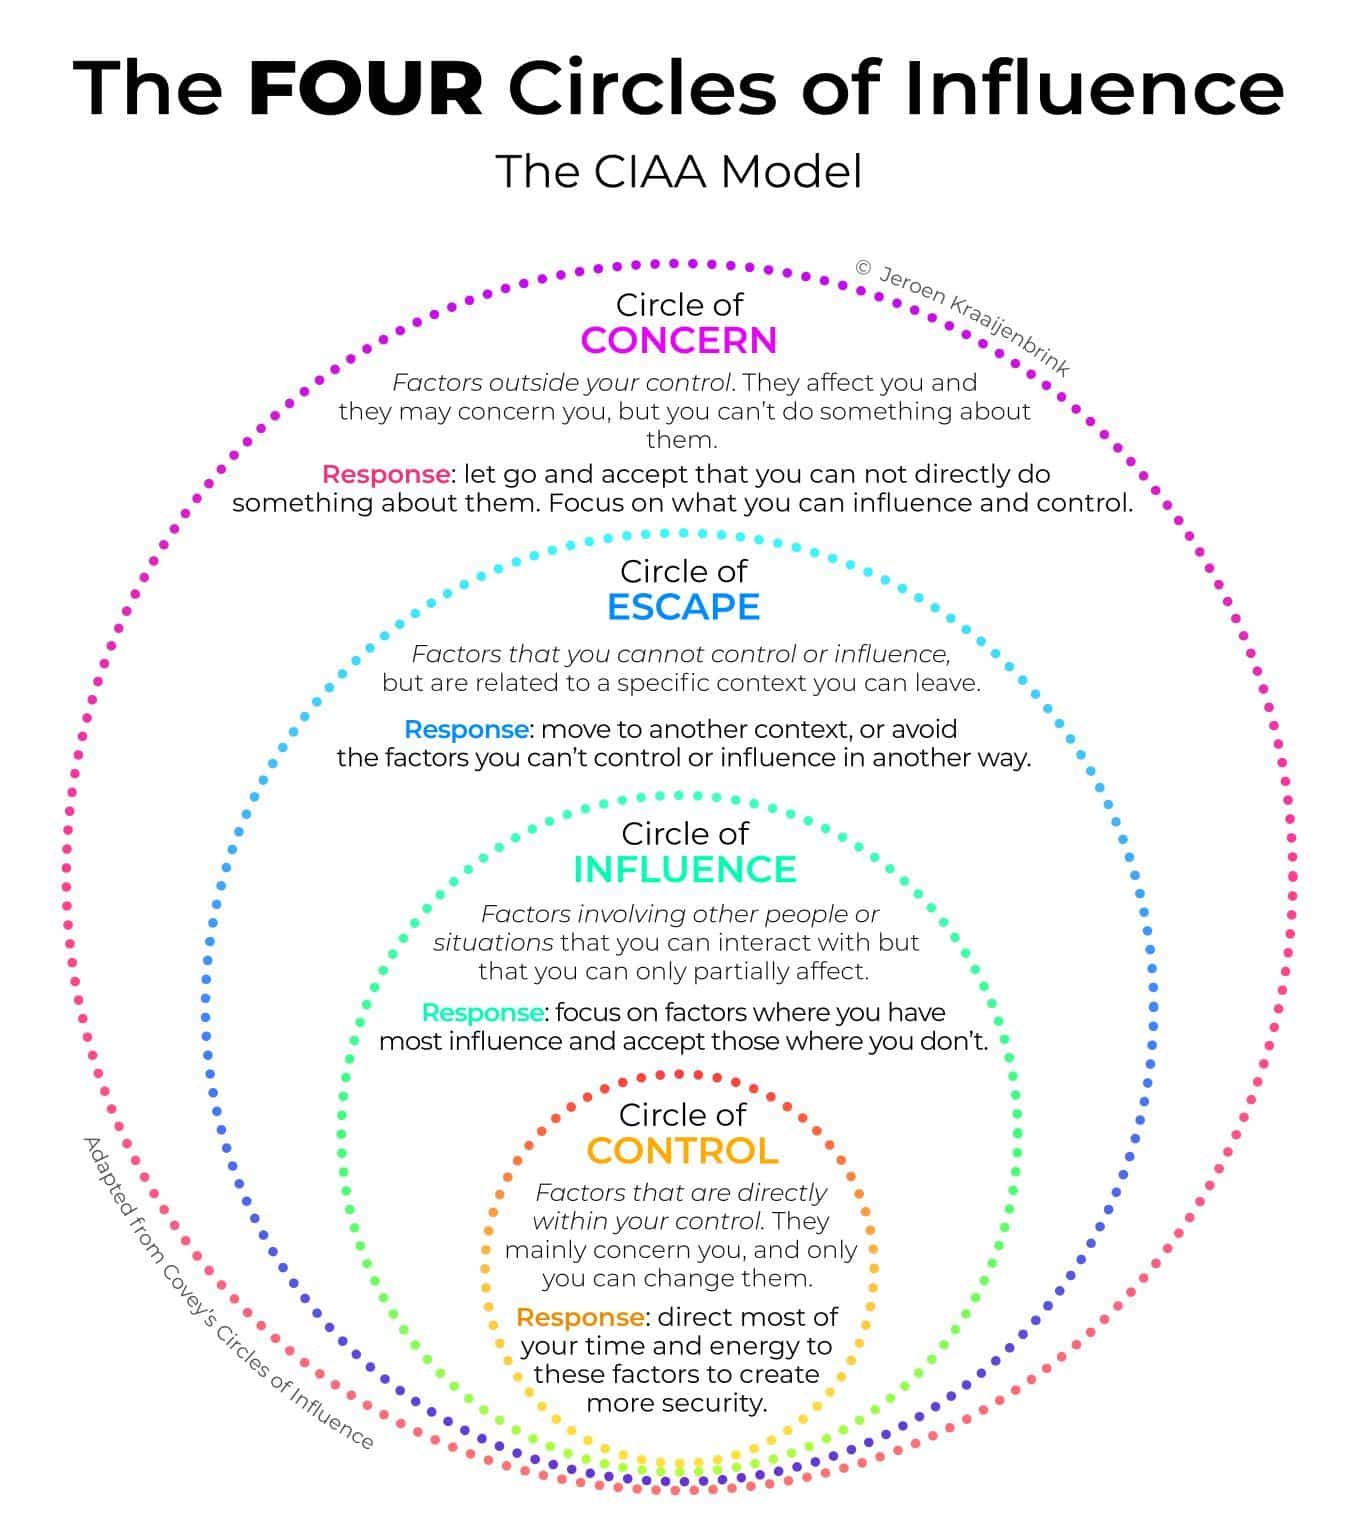 https://www.linkedin.com/posts/business-infographics_the-four-circles-of-influence-credits-to-activity-7191049906868903936-LIzD